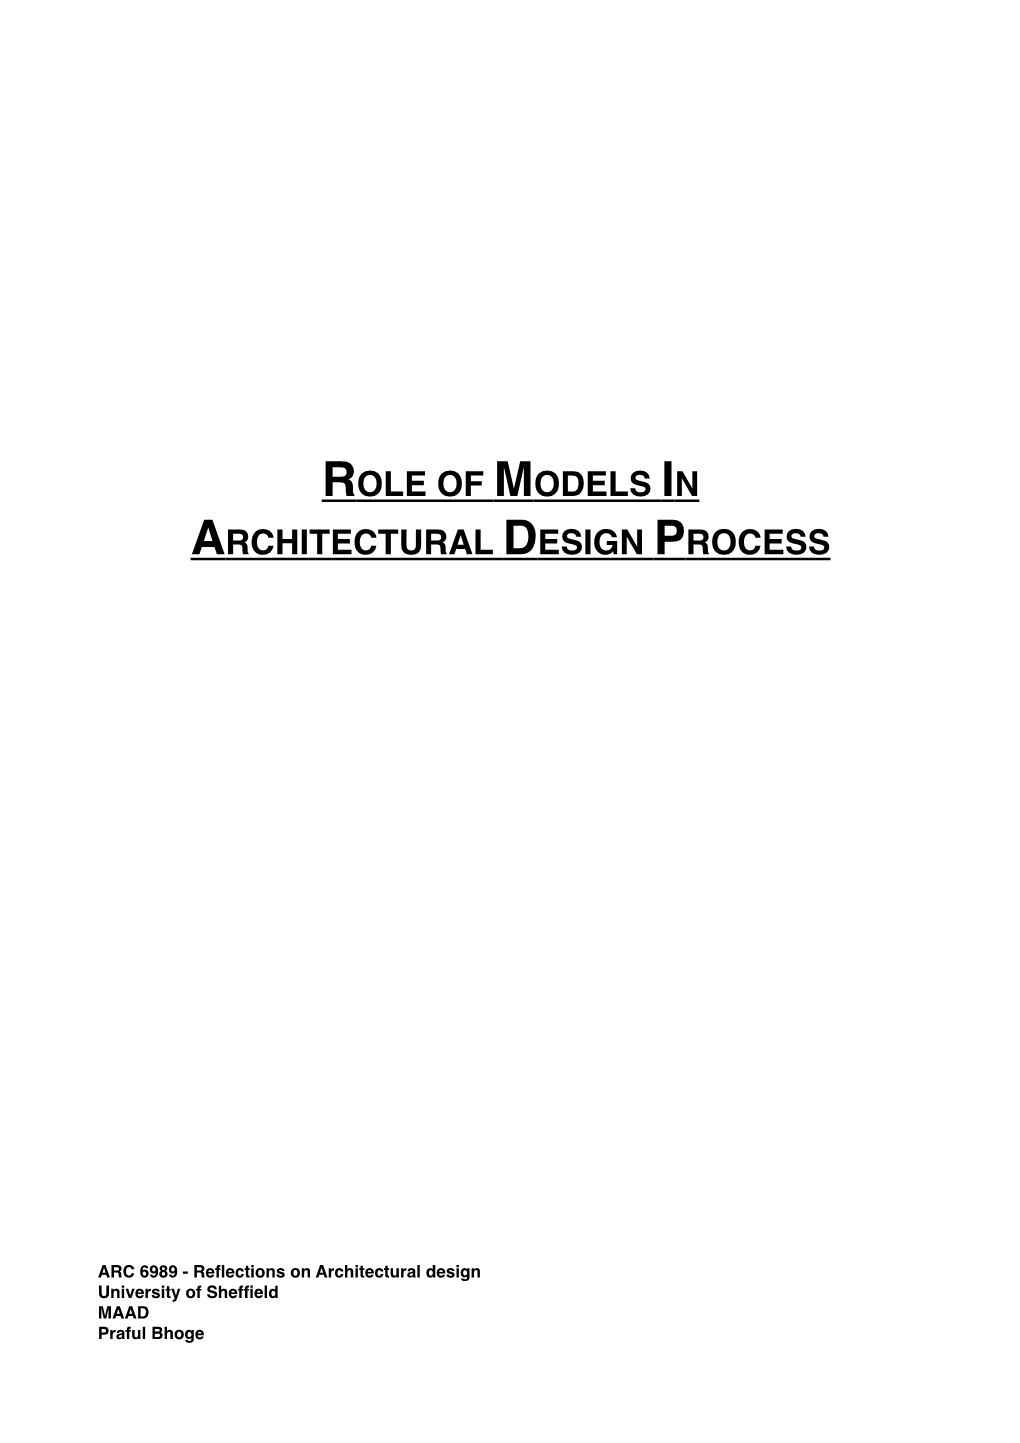 Role of Models in Architectural Design Process